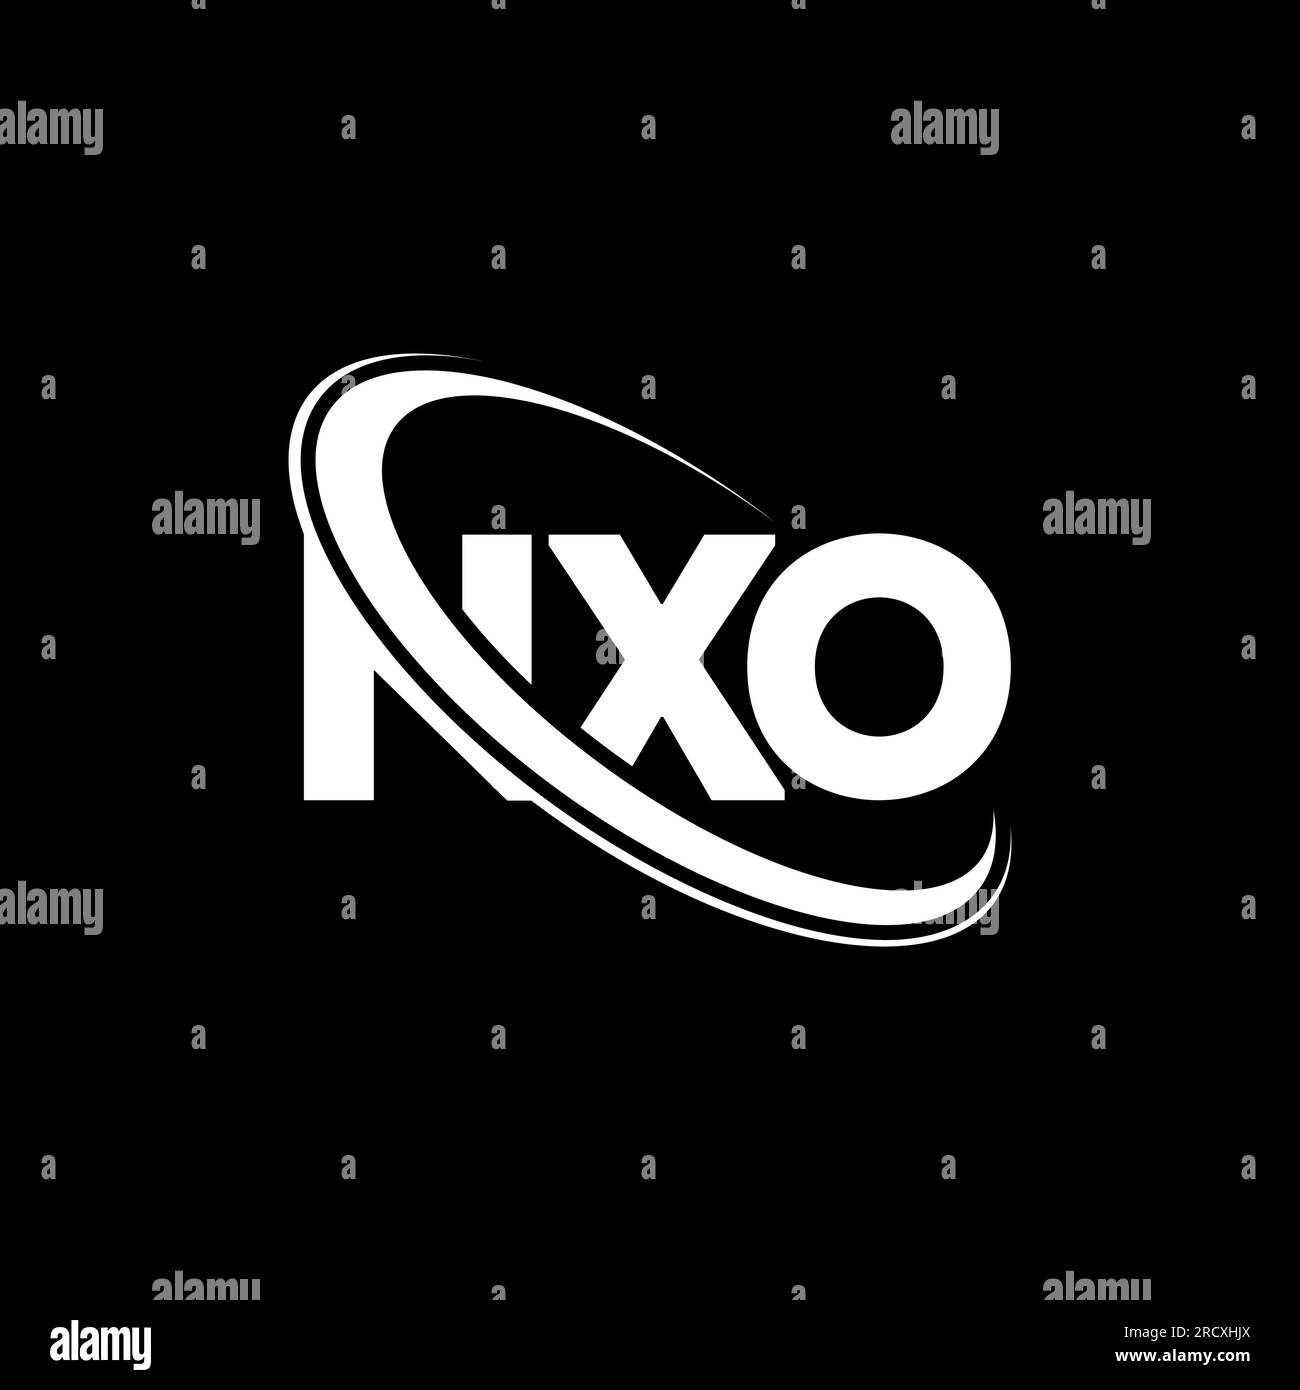 NXO logo. NXO letter. NXO letter logo design. Initials NXO logo linked with circle and uppercase monogram logo. NXO typography for technology, busines Stock Vector